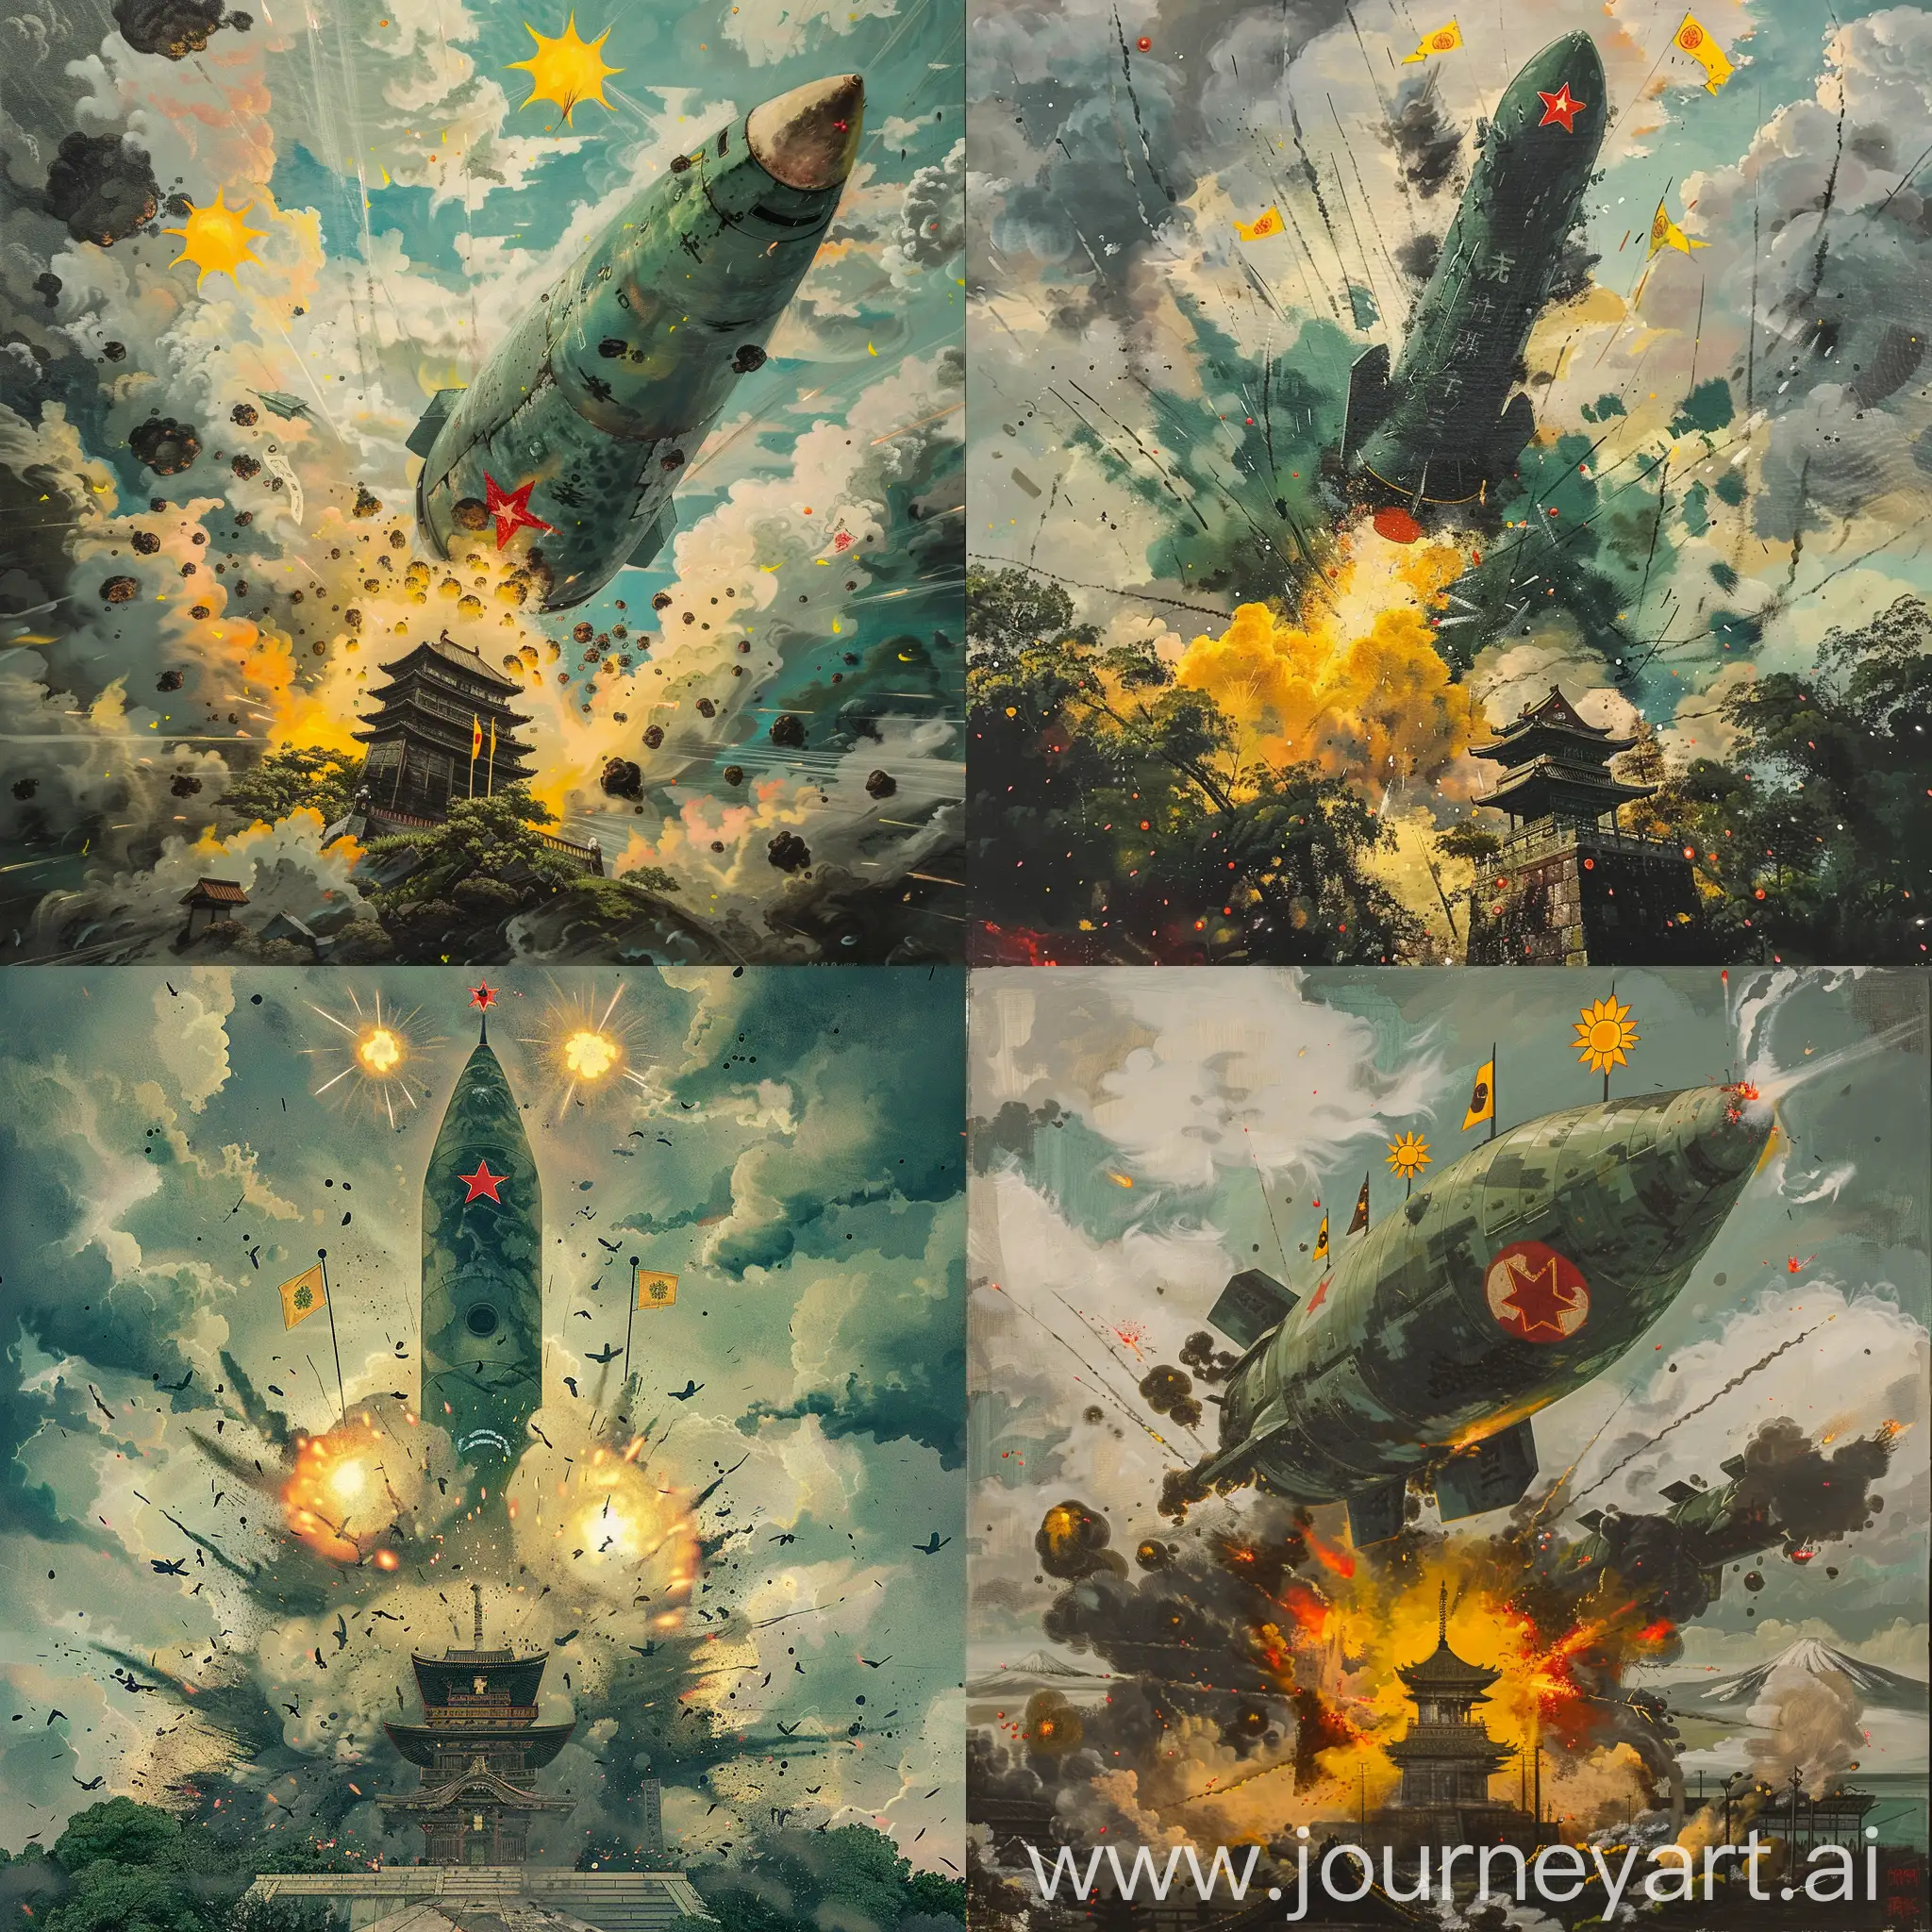 Historic painting mode:

an explosion scene, a giant deep green color Chinese missiles DF21, with a red star emblem in the middle of this missile, is attacking the Japanese Yasukuni shrine under fire,

they are yellow black color Japanese imperial emblems flags on the top of shrine,

three small yellow suns in cloudy sky,